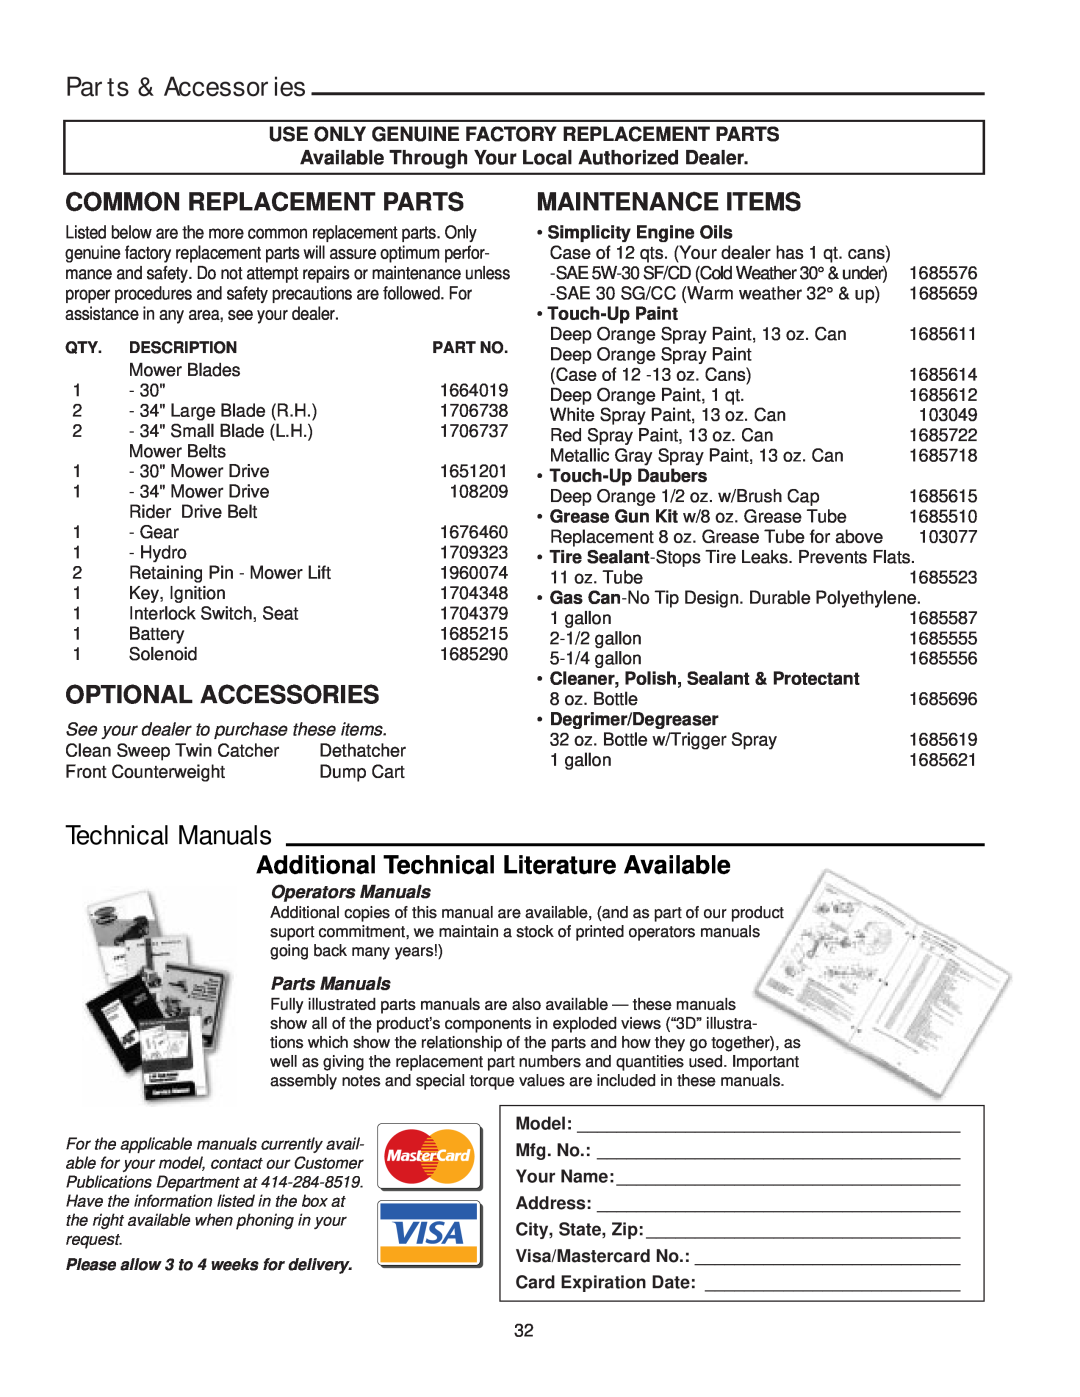 Simplicity 14HP Parts & Accessories, Technical Manuals, Common Replacement Parts, Optional Accessories, Maintenance Items 